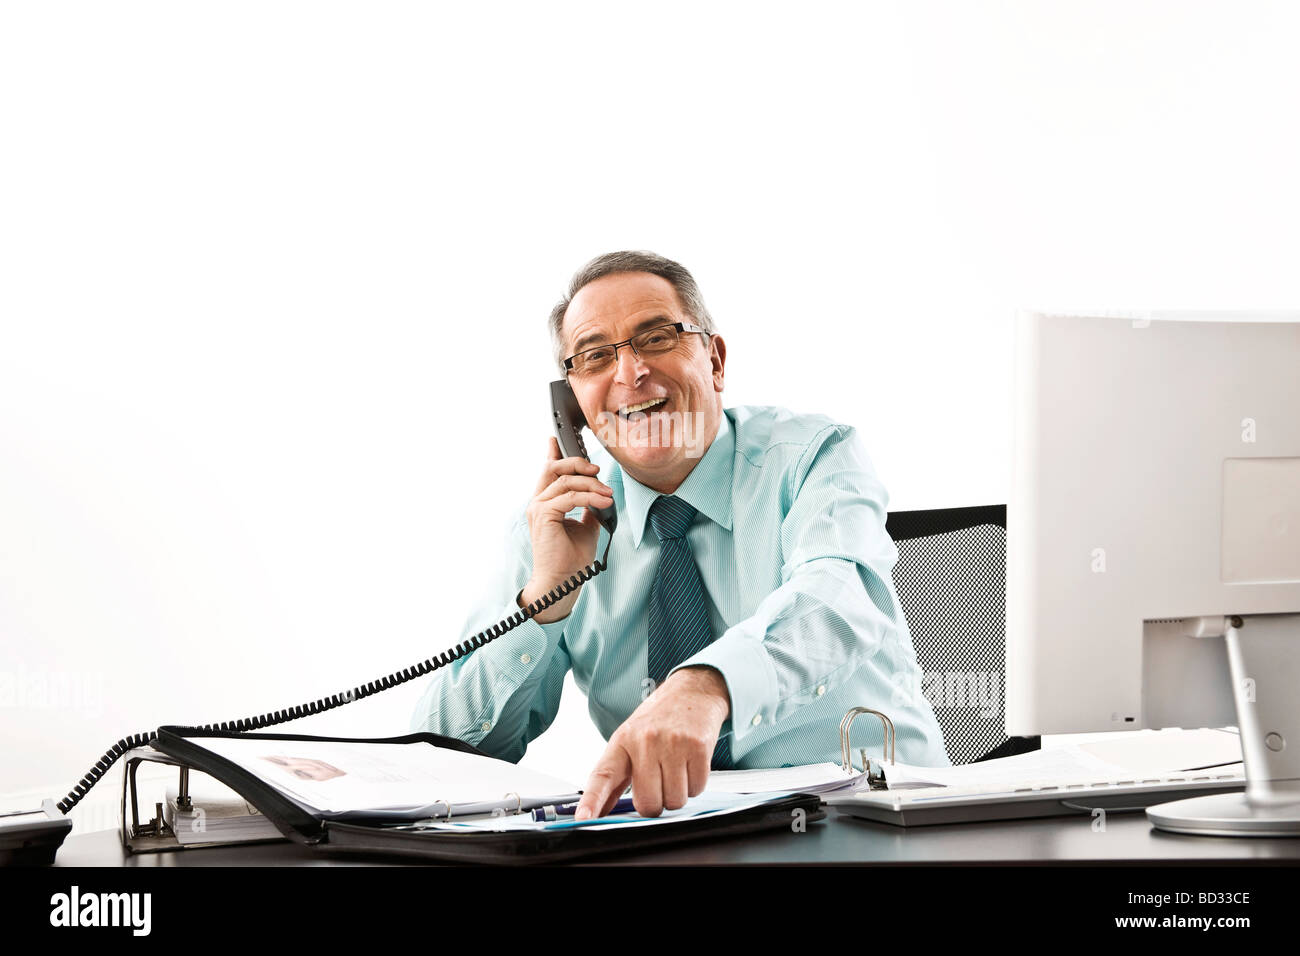 Manager with glasses sitting at his desk with a computer, speaking and laughing on the telephone Stock Photo